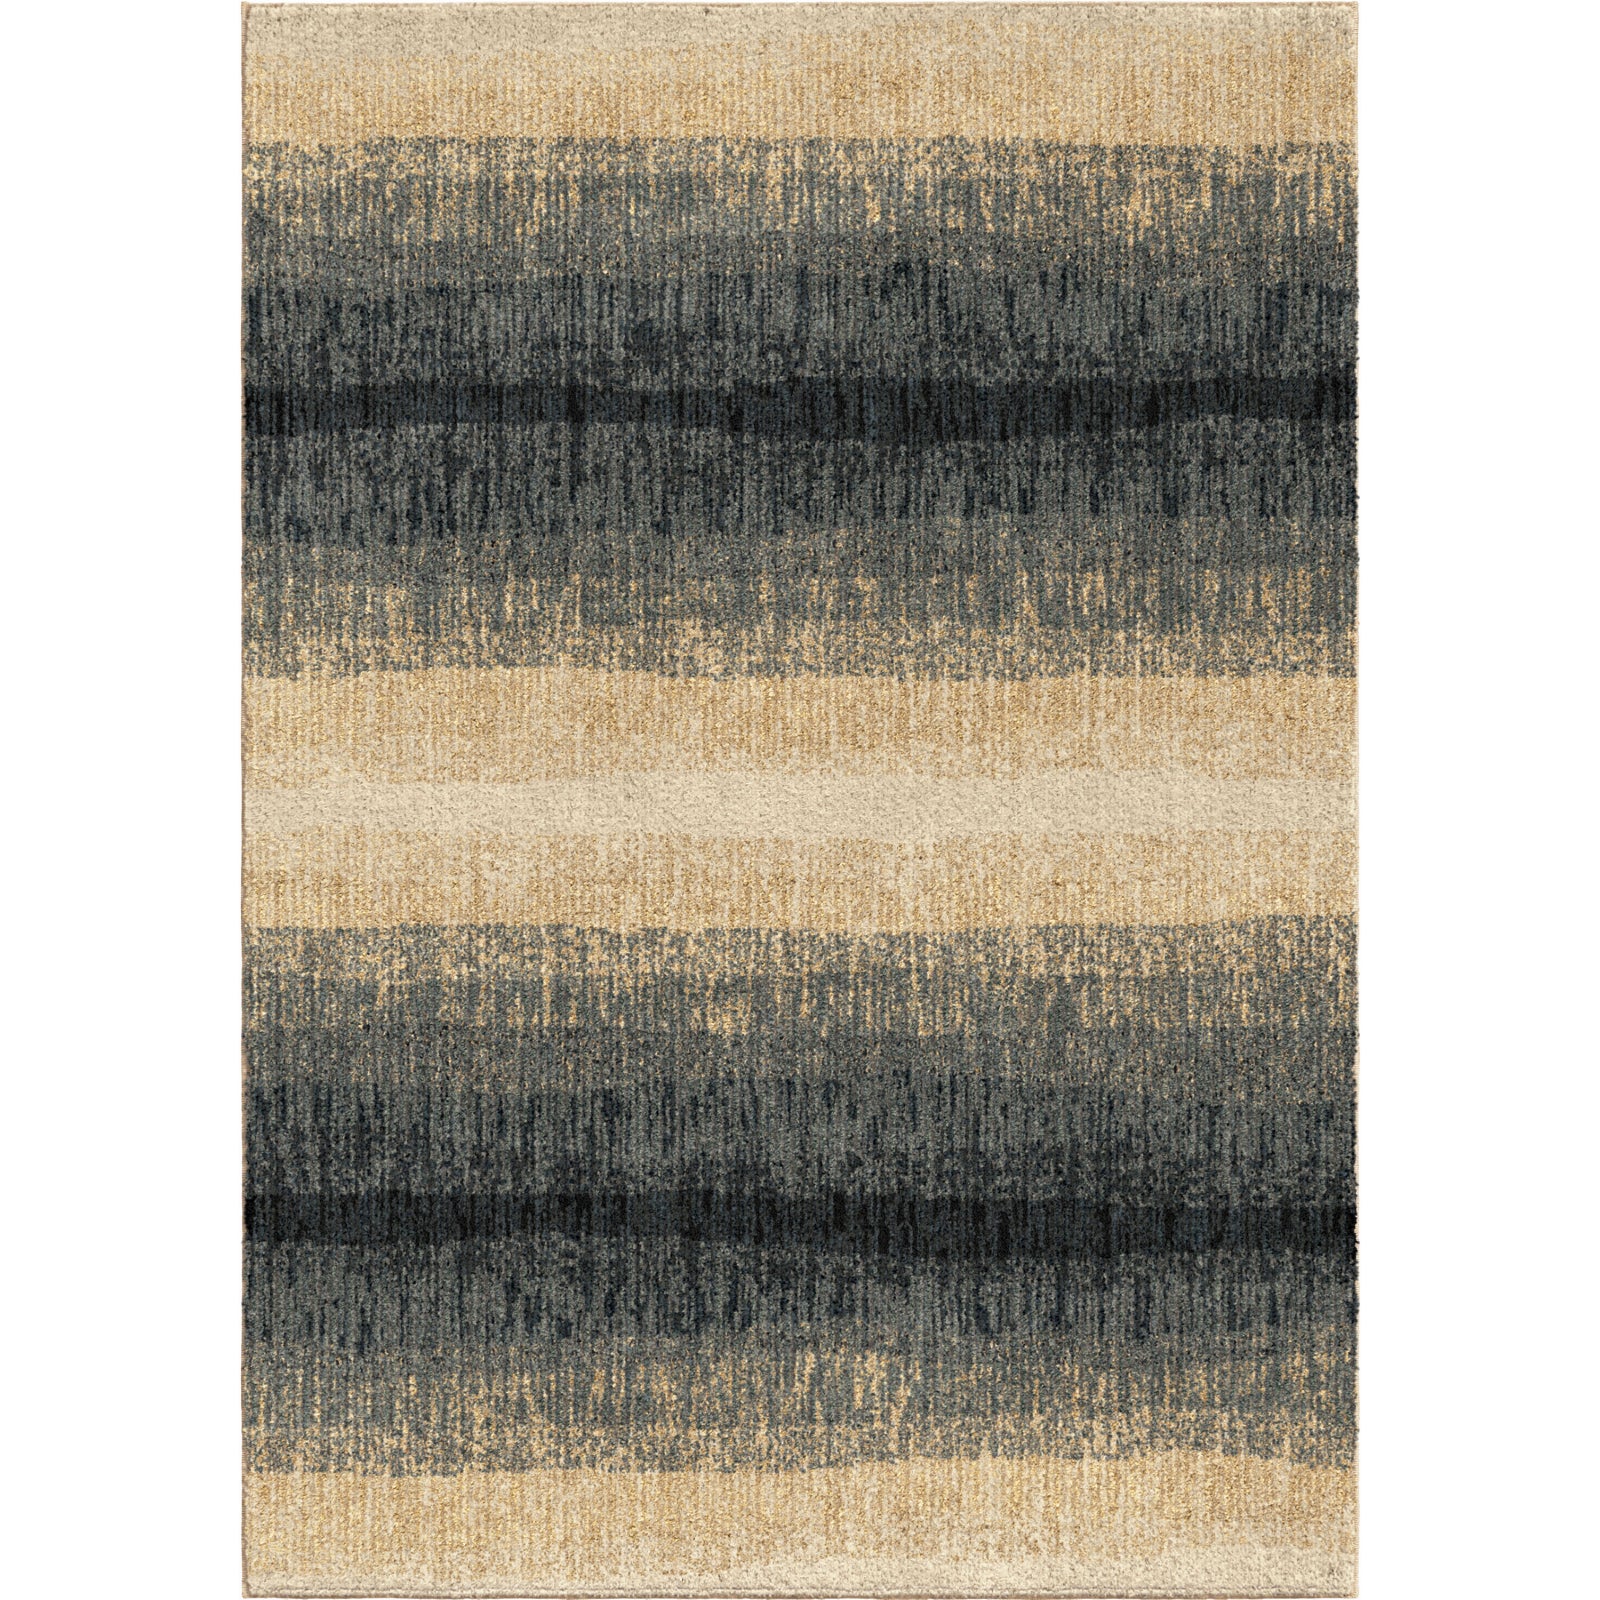 Orian Rugs New Horizons Fading Blue Lines Area Rug main image